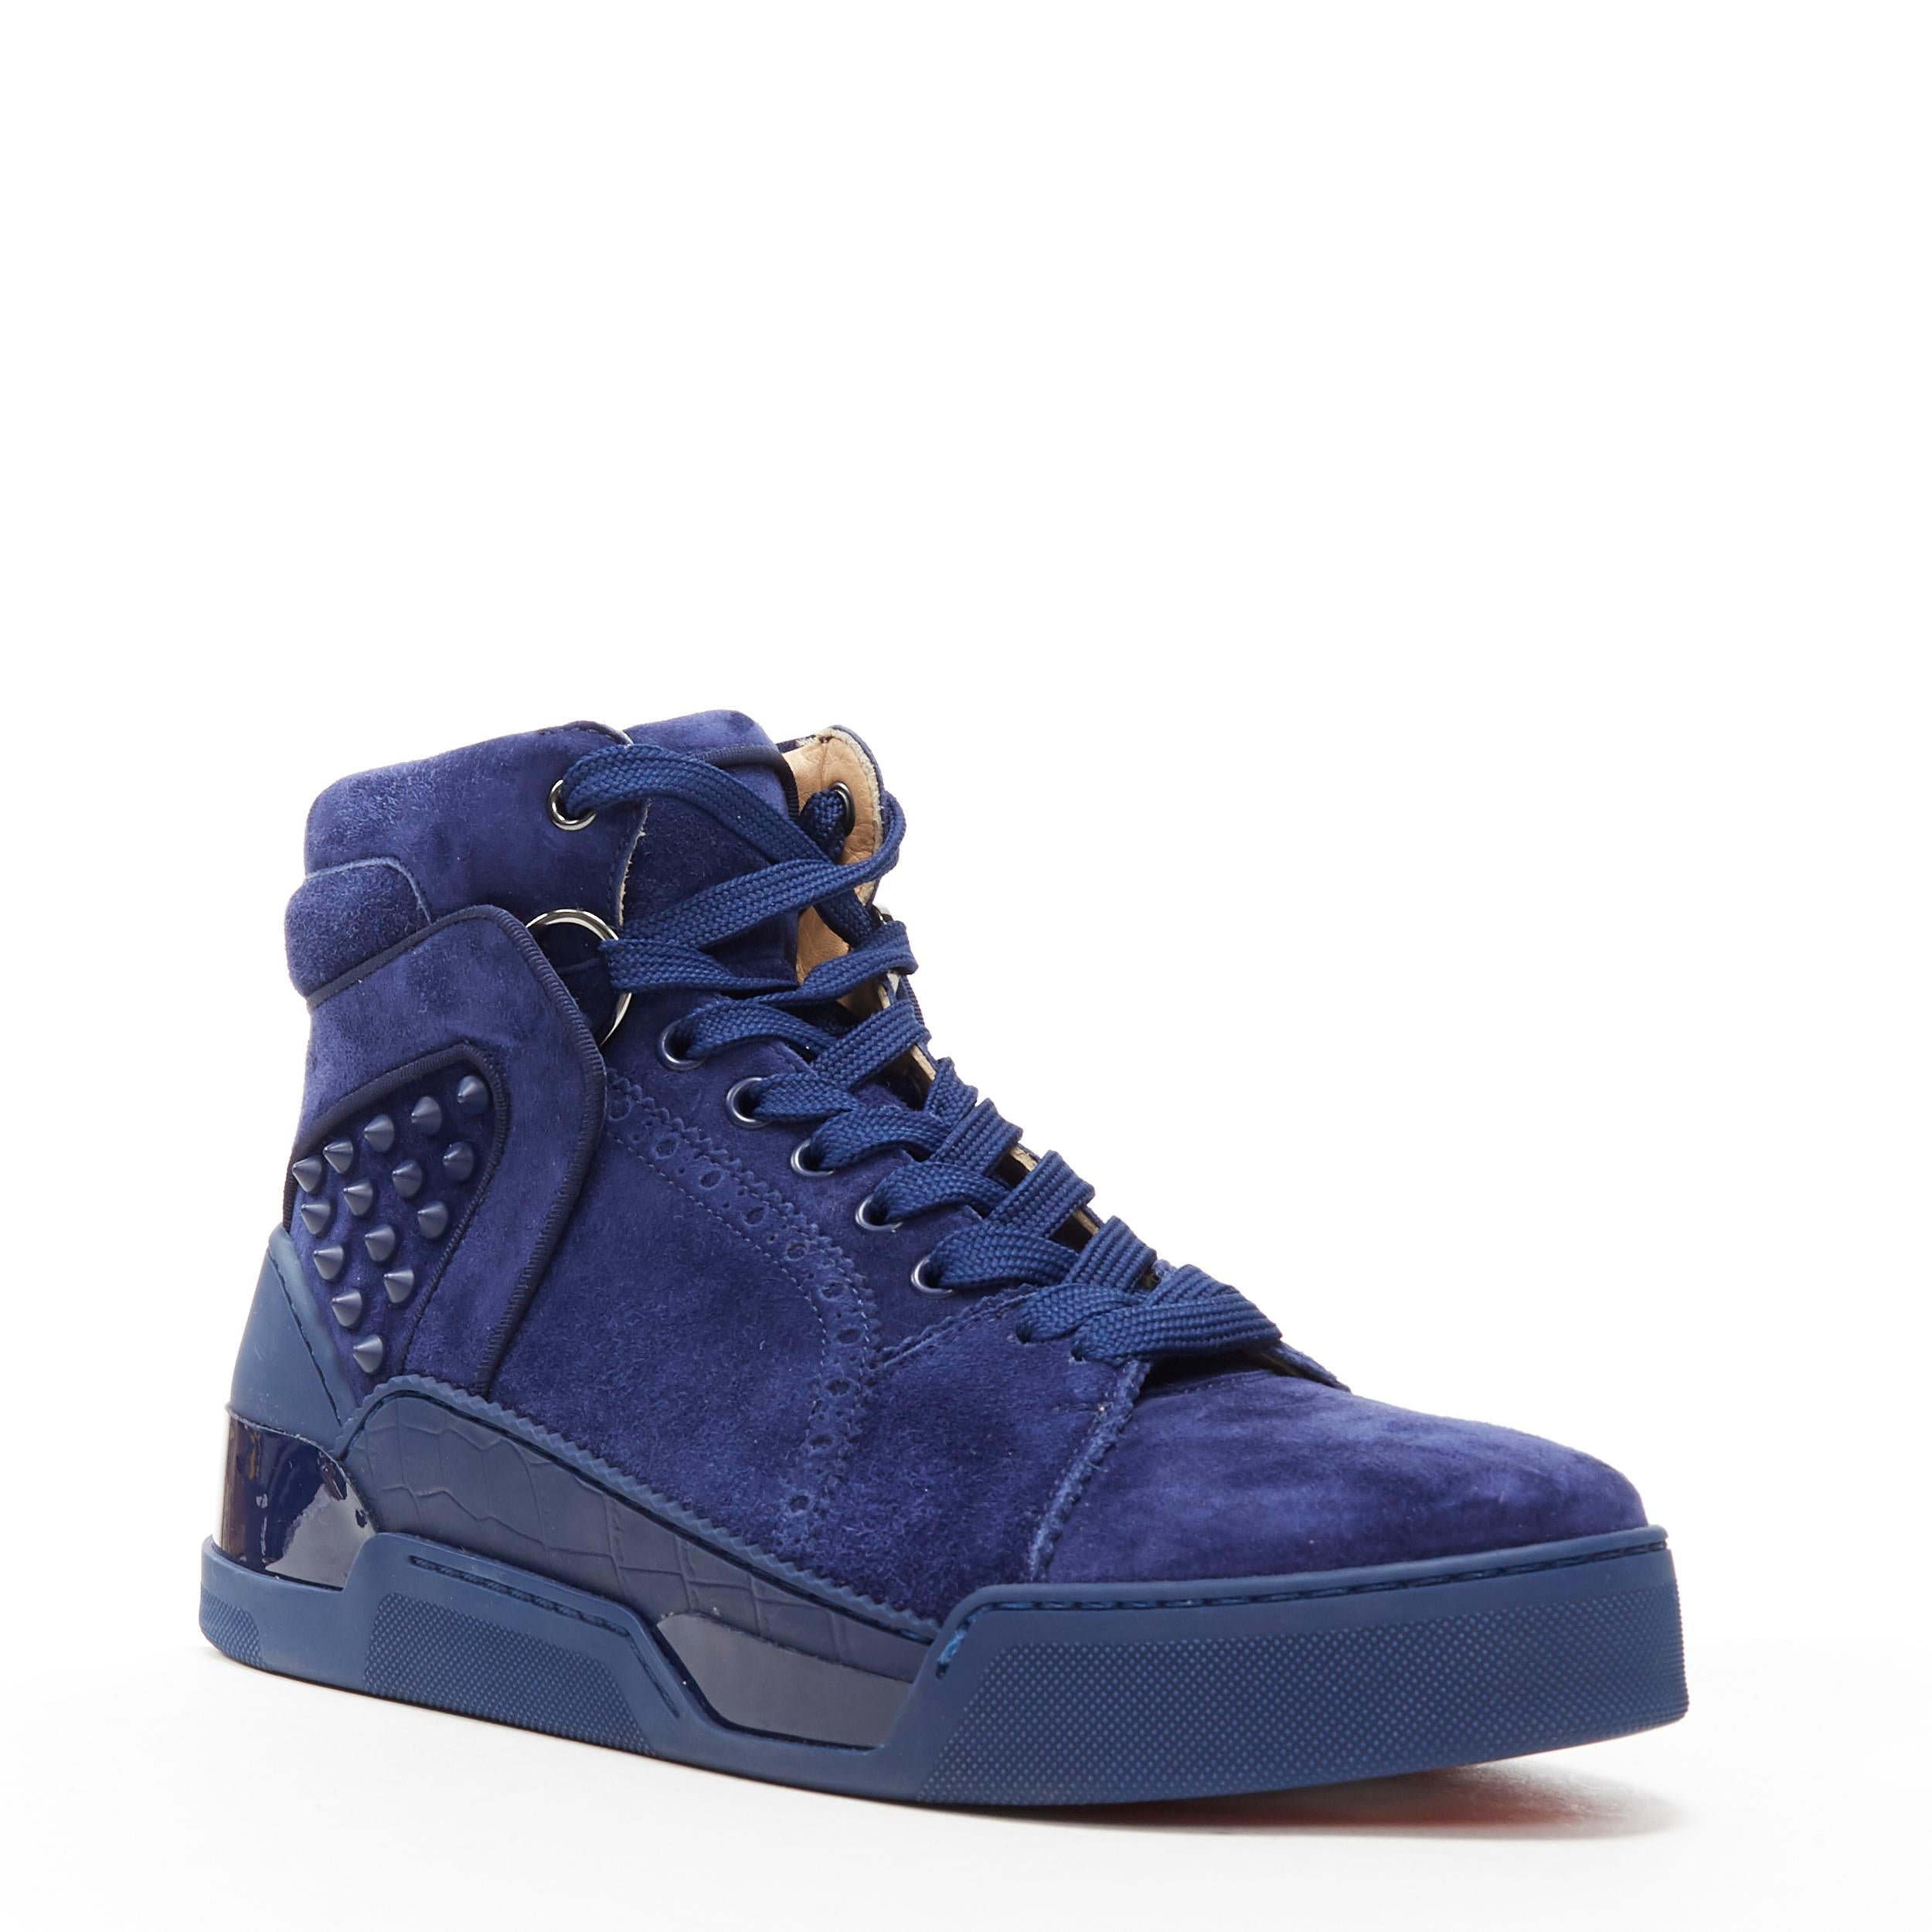 new CHRISTIAN LOUBOUTIN Loubikick navy blue suede spike high top sneaker EU41
Brand: Christian Louboutin
Designer: Christian Louboutin
Model Name / Style: Loubikick
Material: Suede
Color: Blue
Pattern: Solid
Closure: Lace up
Extra Detail: Style